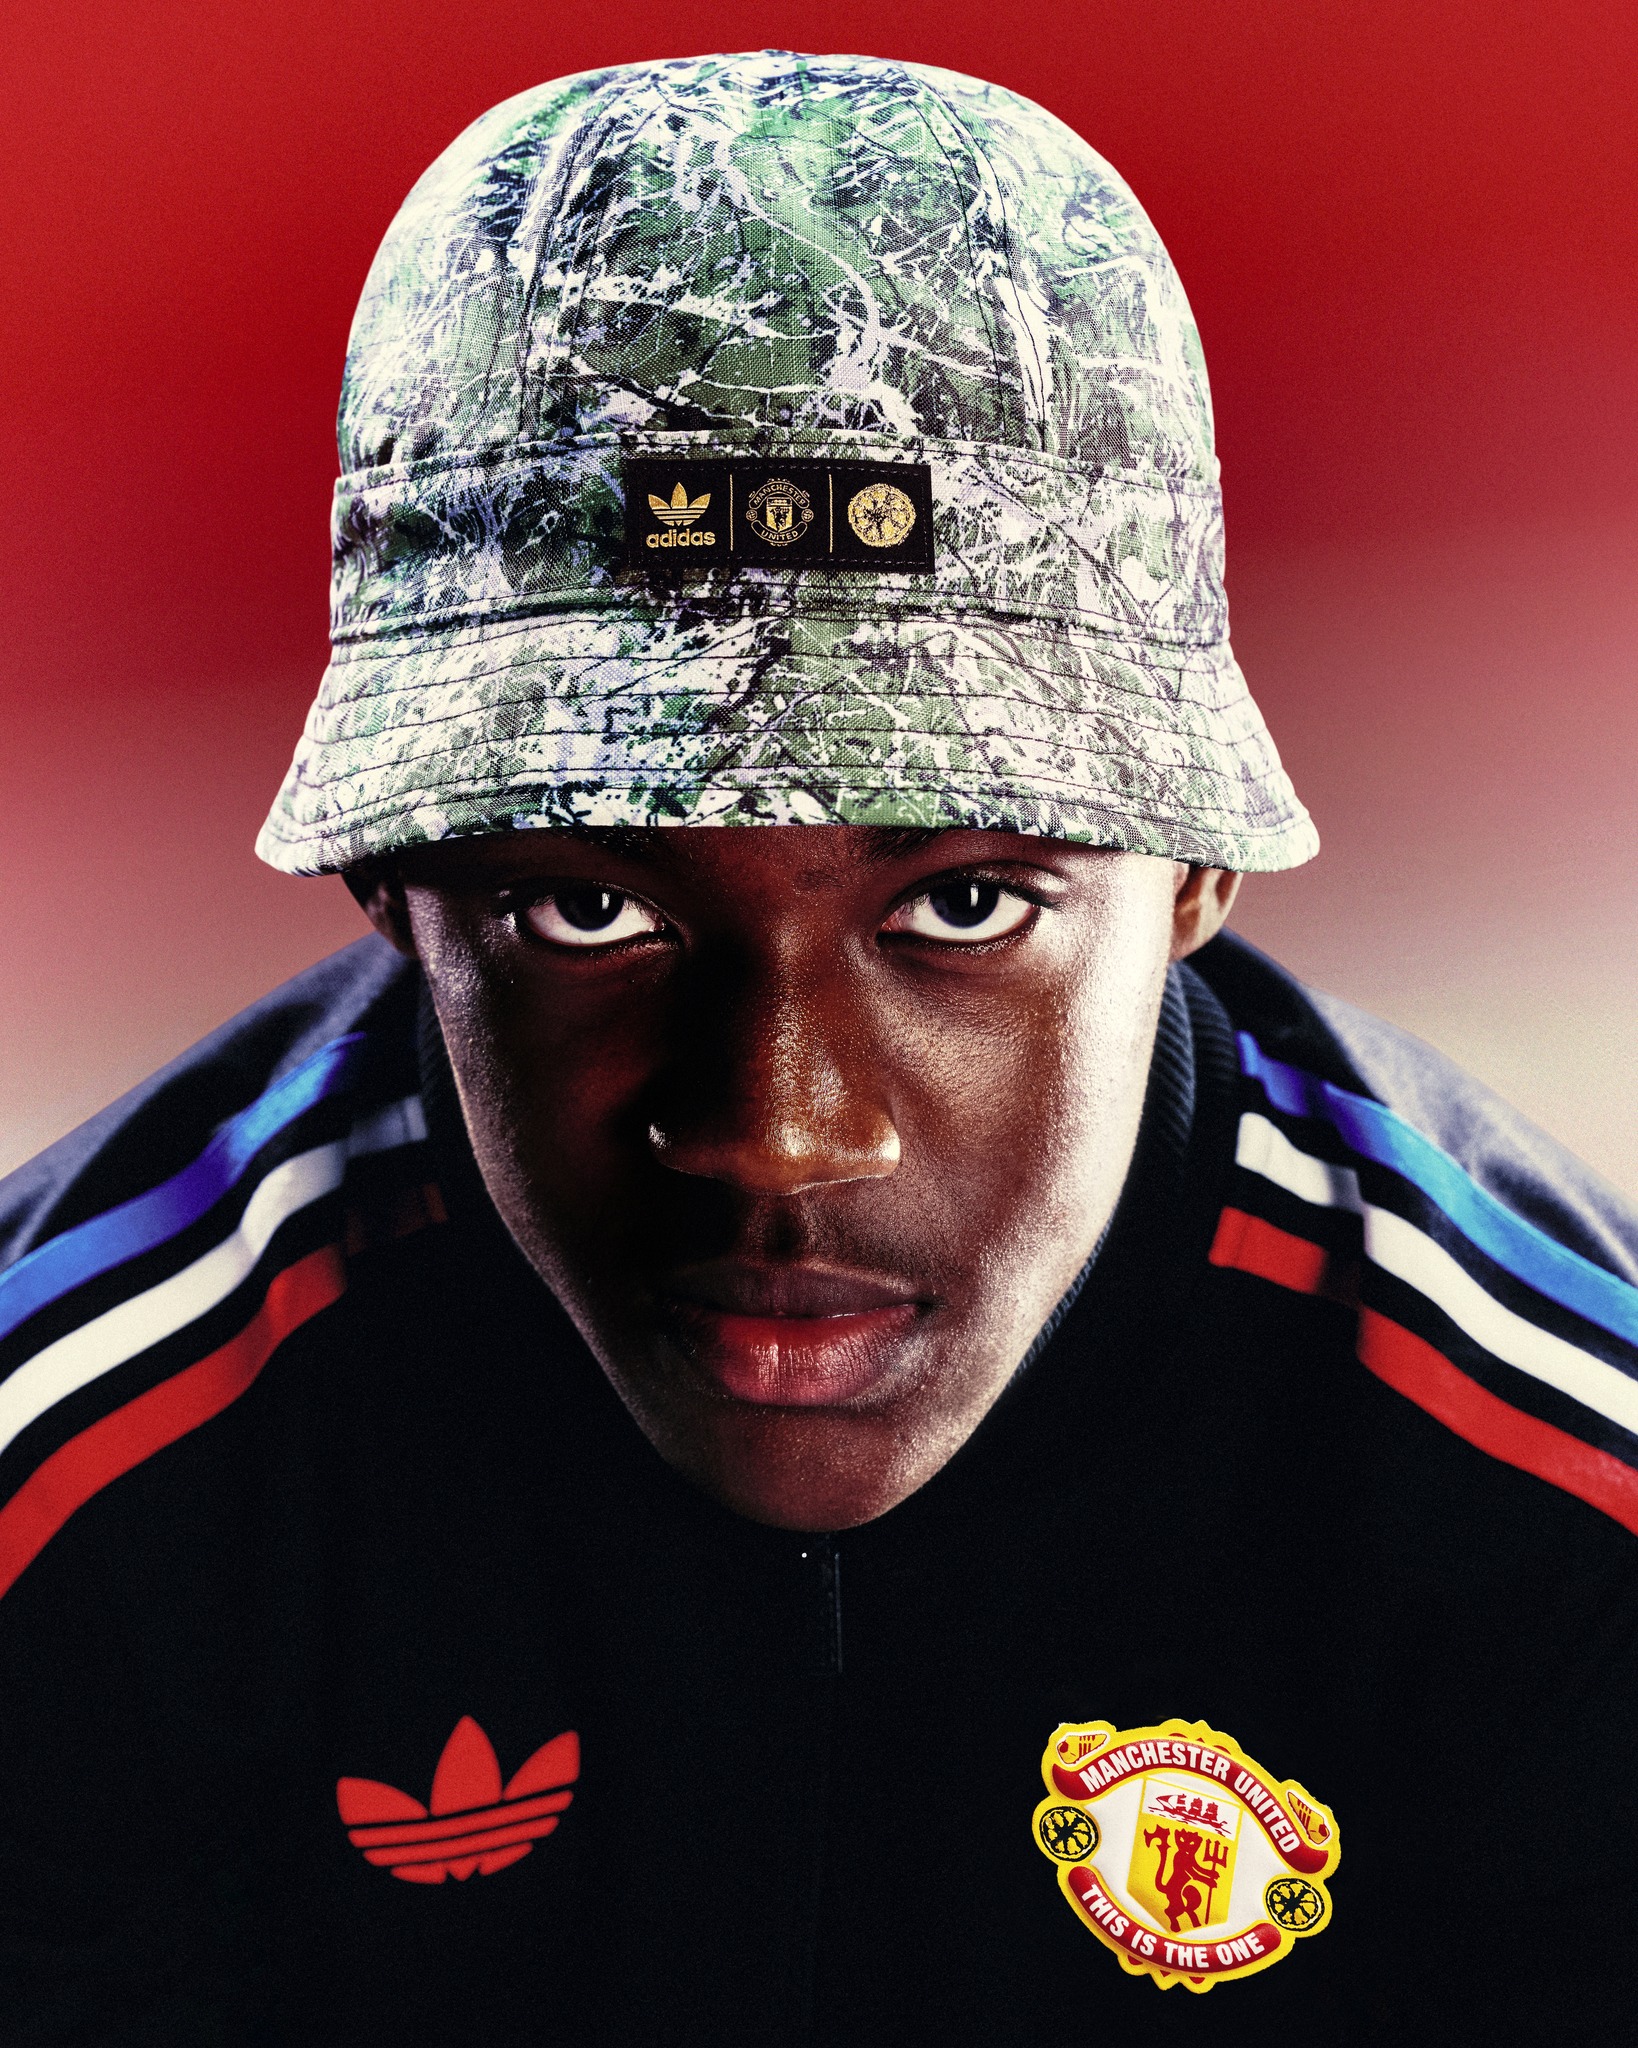 SON OF DEVIL: Man Utd star Kobbie Mainoo made a cool pose as collaborating with Adidas to announce special edition kit Stone Roses